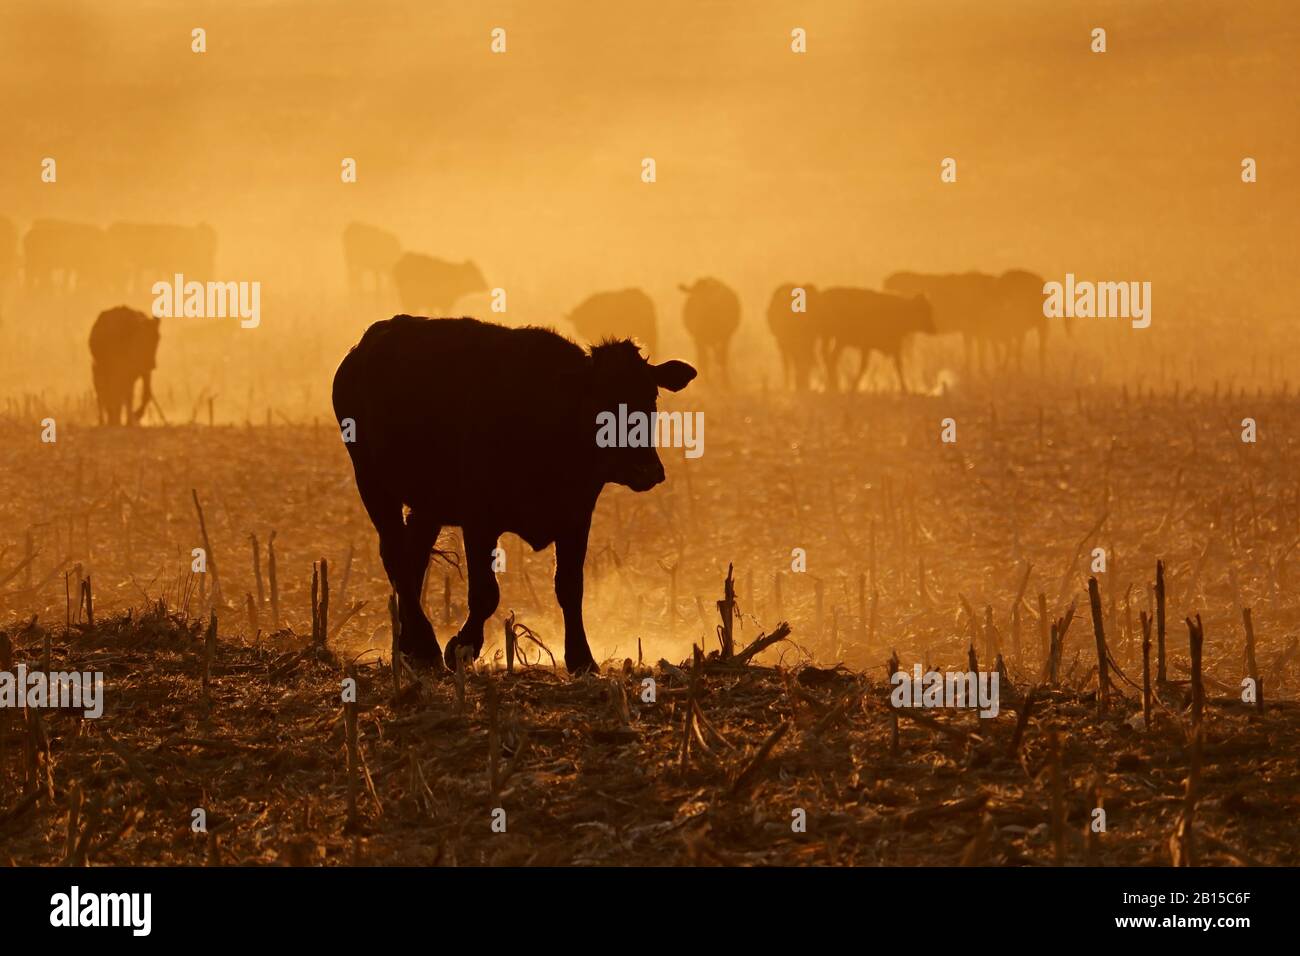 Silhouette of free-range cattle walking on dusty field at sunset, South Africa Stock Photo